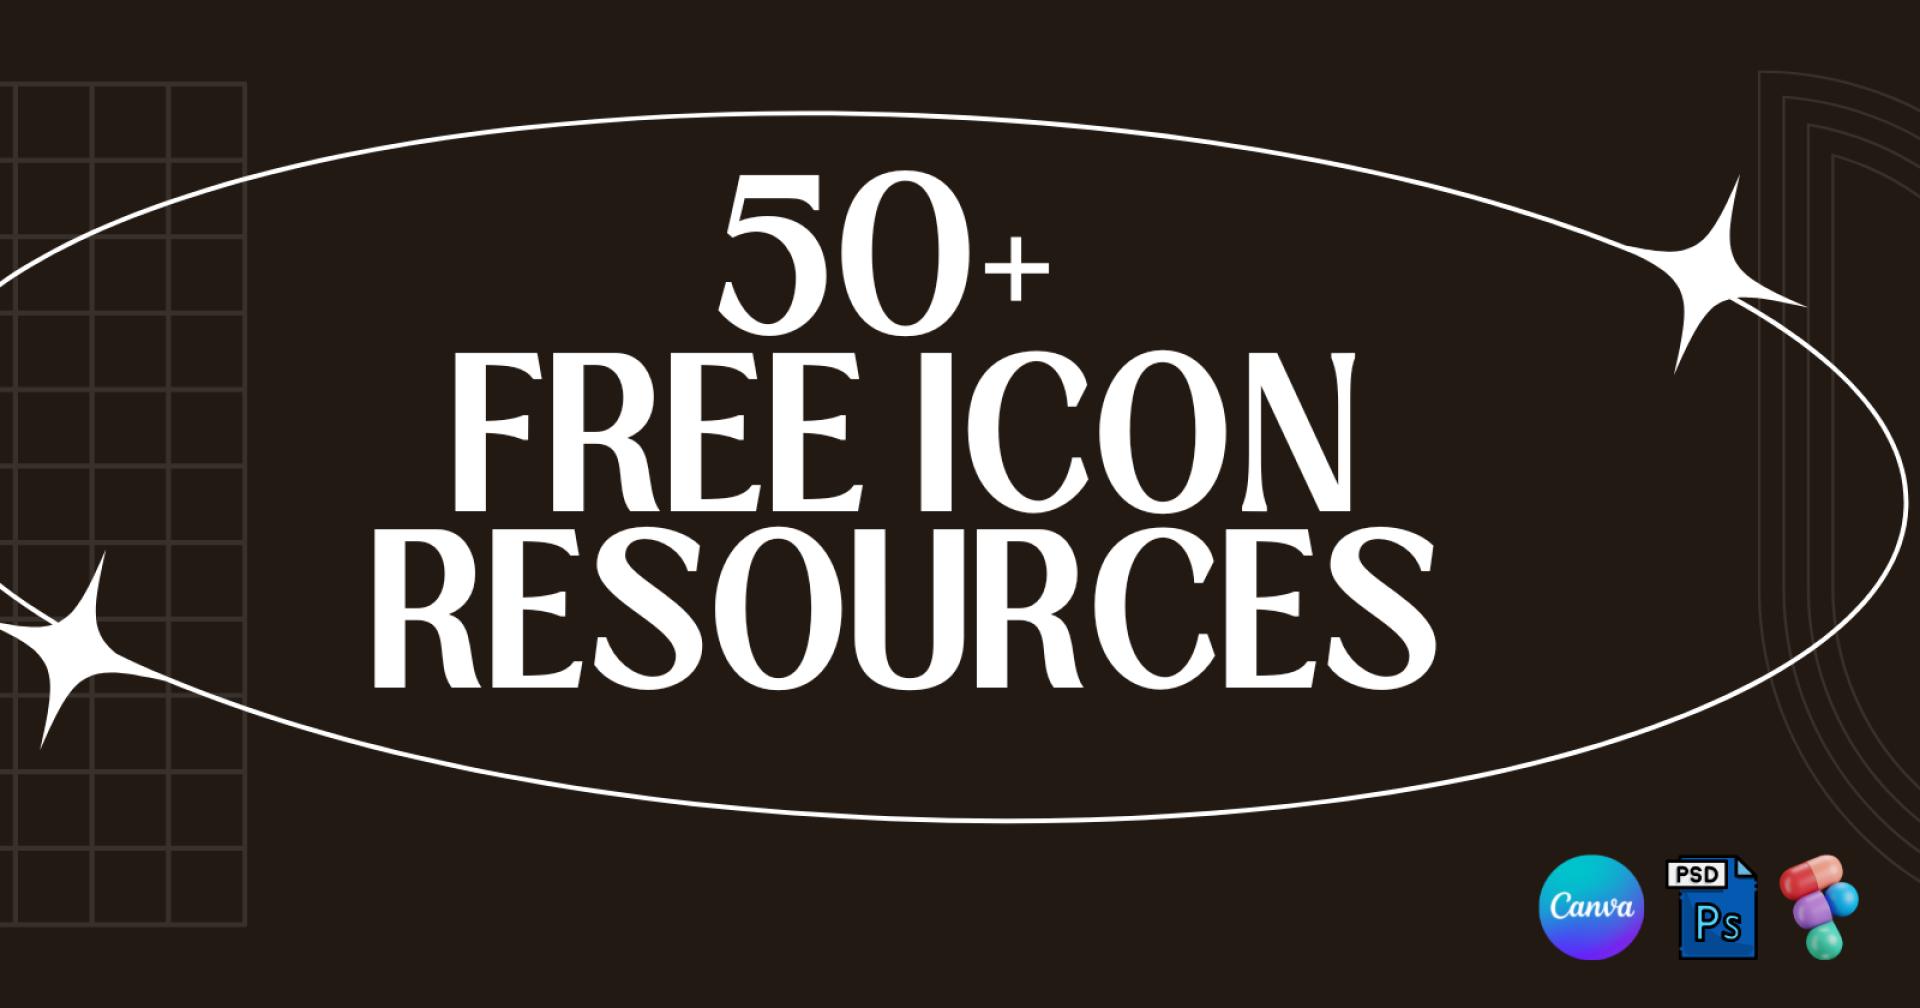 50+ Free Icon resources for your projects